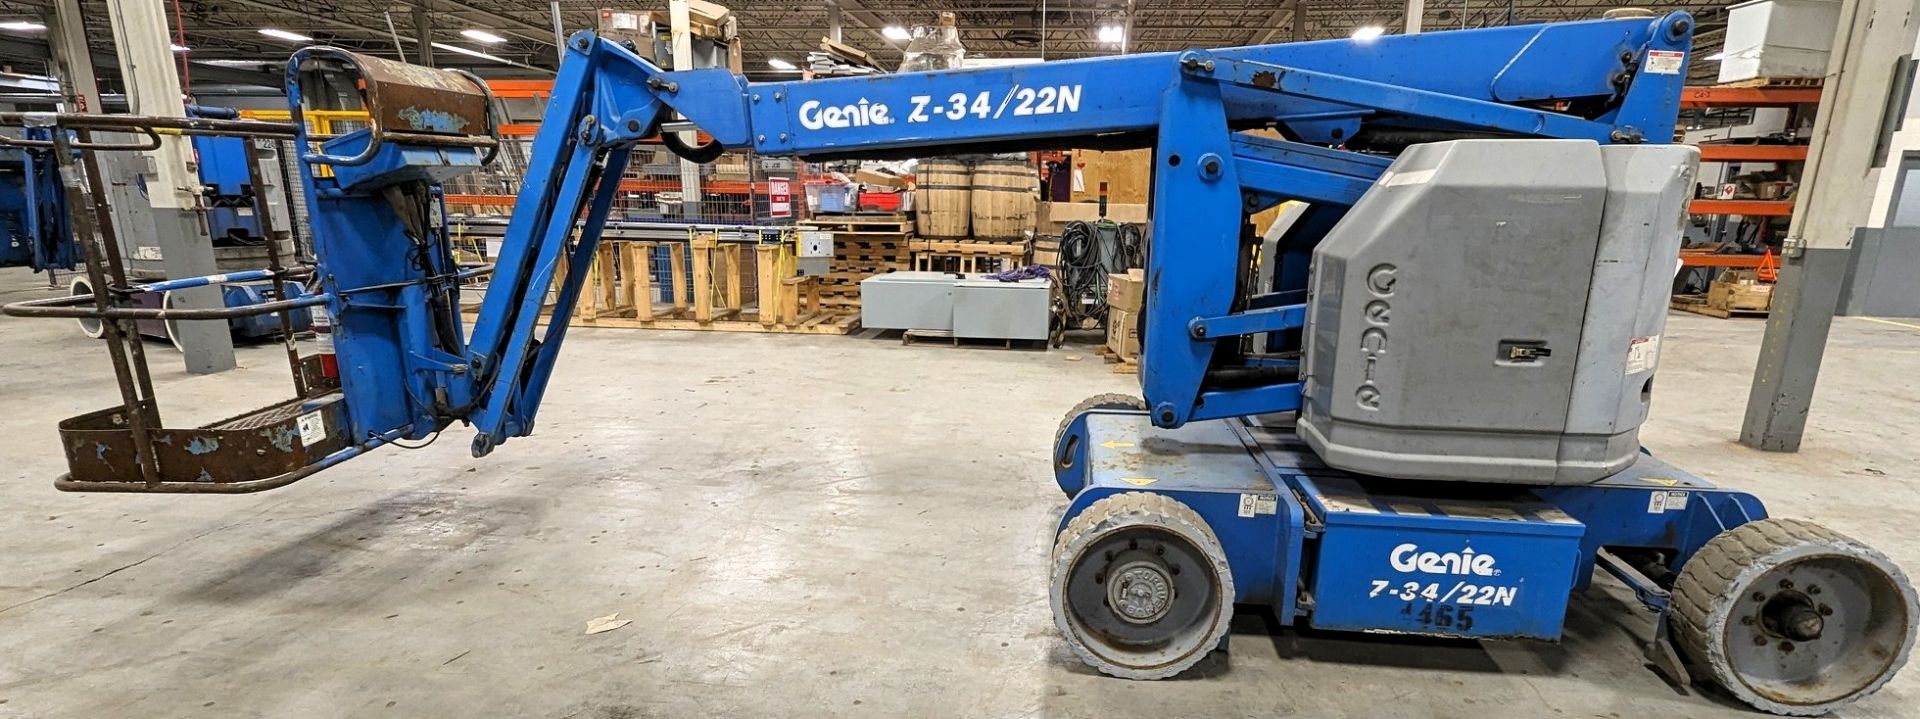 2007 GENIE Z34/22-N ARTICULATED BOOM, 34'-4" MAX WORKING HEIGHT, 22'-4" MAX PLATFORM REACH, - Image 5 of 15